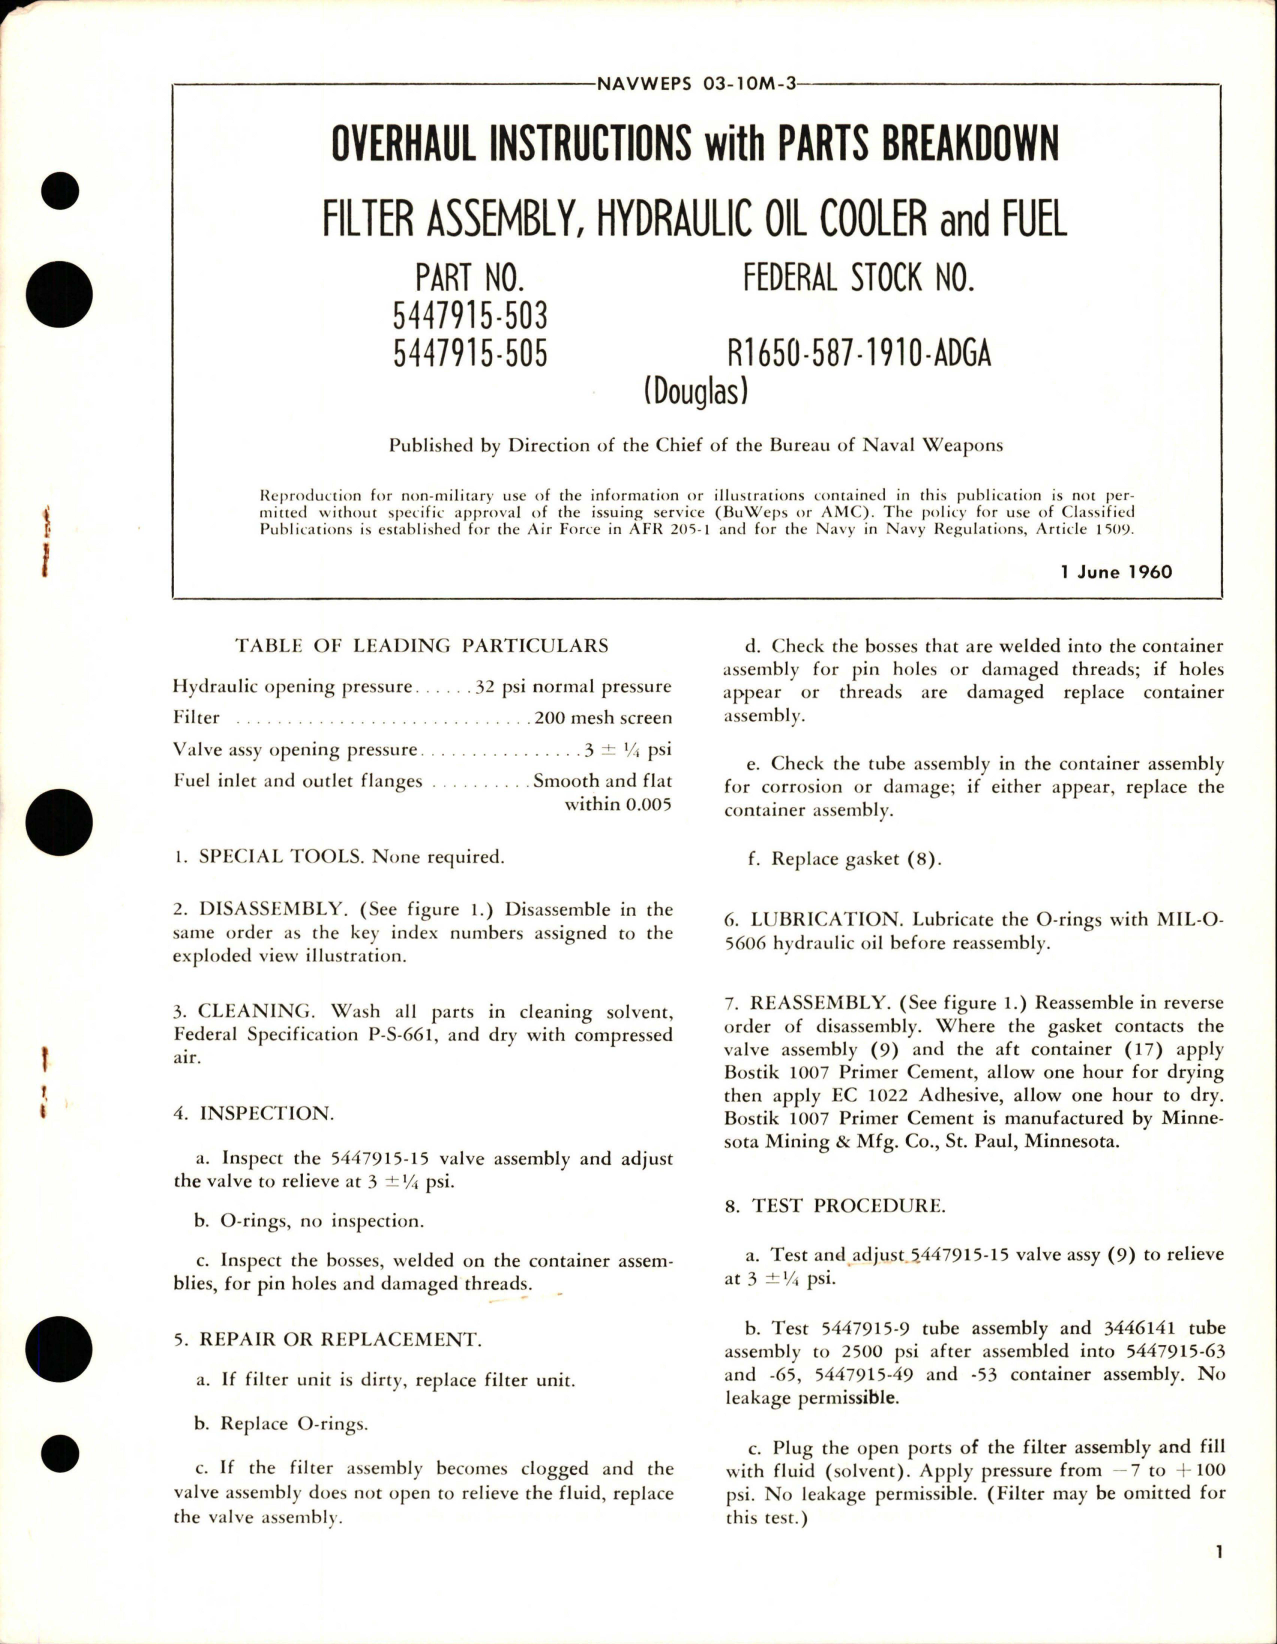 Sample page 1 from AirCorps Library document: Overhaul Instructions with Parts for Hydraulic Oil Cooler and Fuel Filter Assembly - Part 5447915-503 and 5447915-505